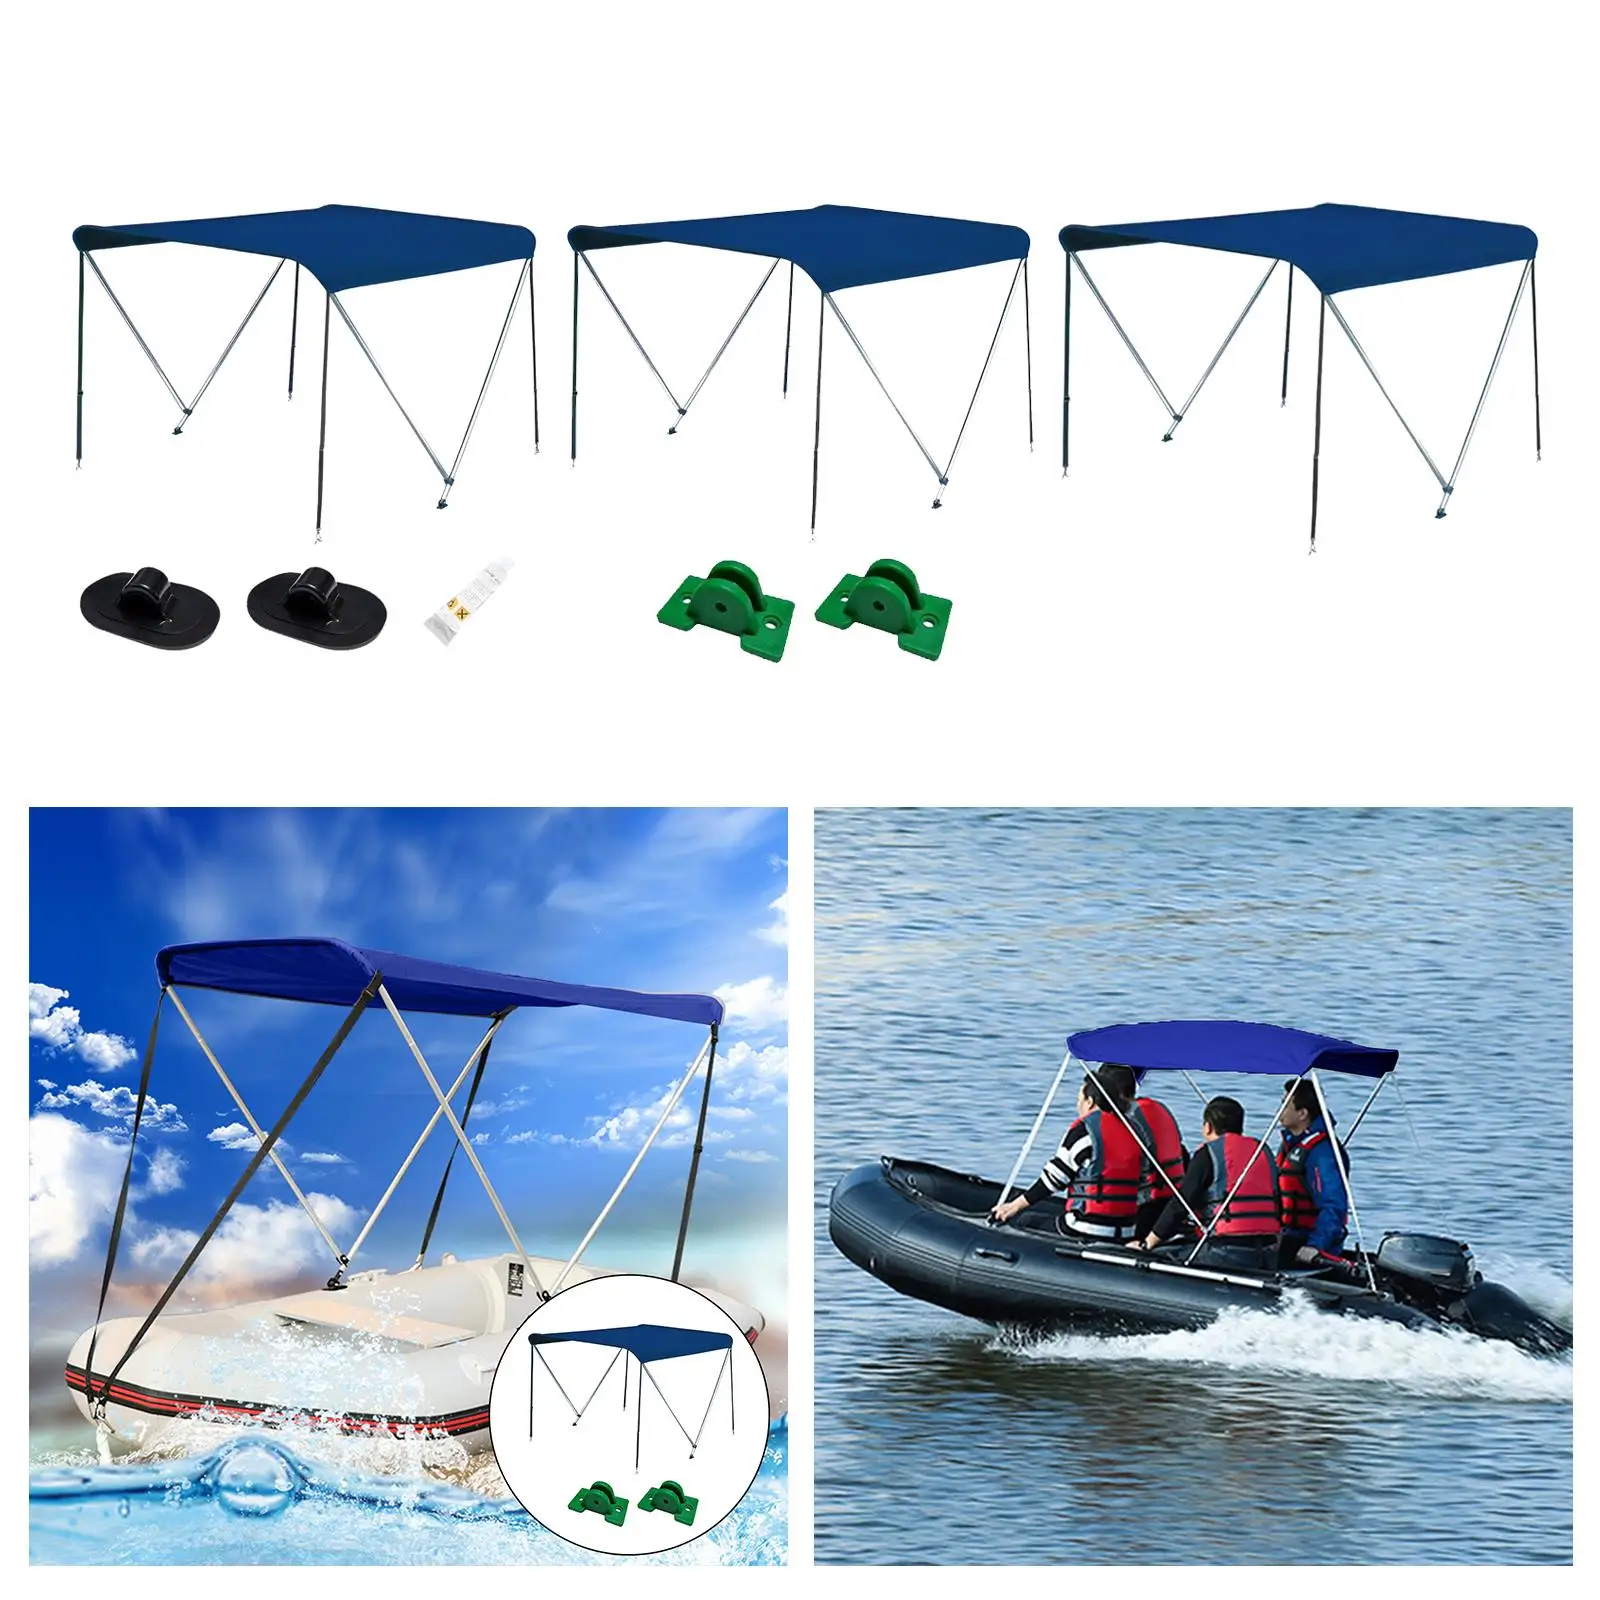 Inflatable Boat Canopy Universal Boat Cover with Frame Hardware Bimini Top Covers for Ship Canoe Dinghy Fishing Boat Sailboat